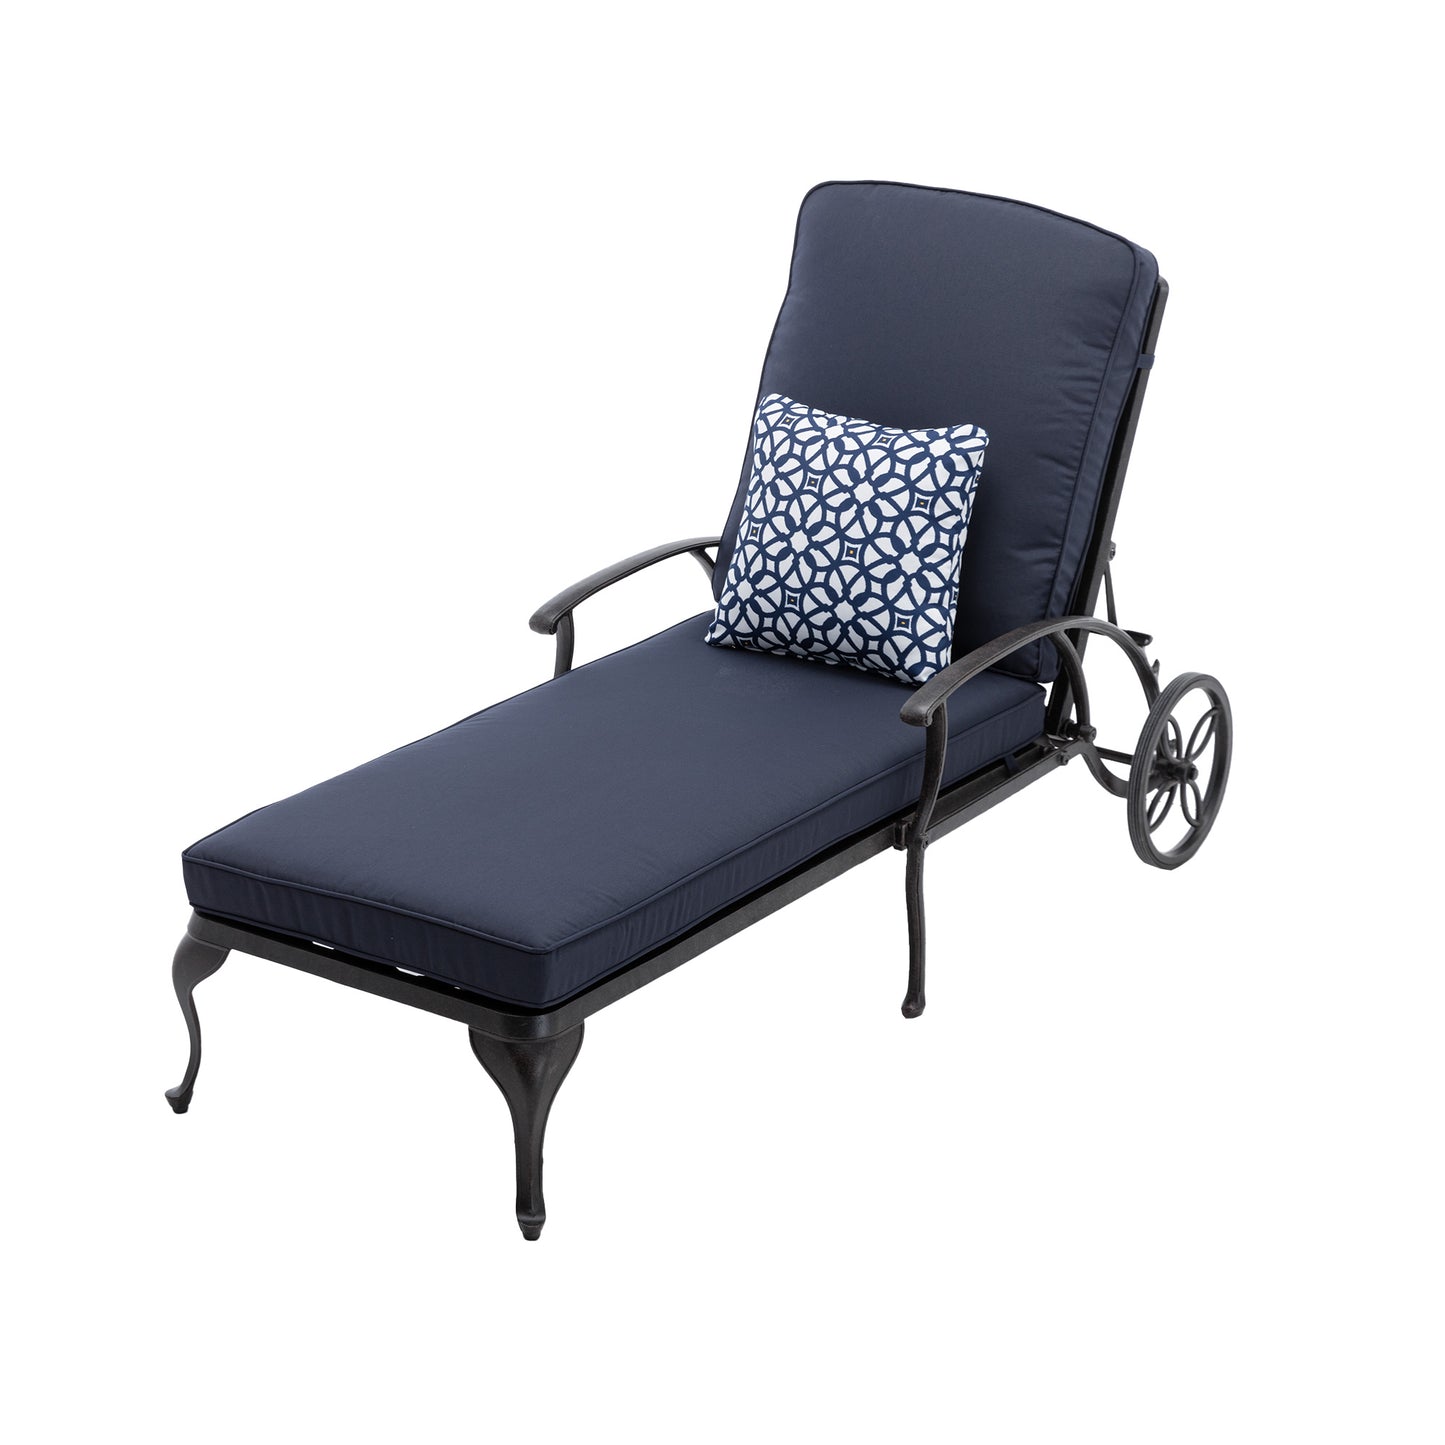 Outdoor Lounge Chair with Navy Blue Cushions with Wheels and Adjustable Reclining